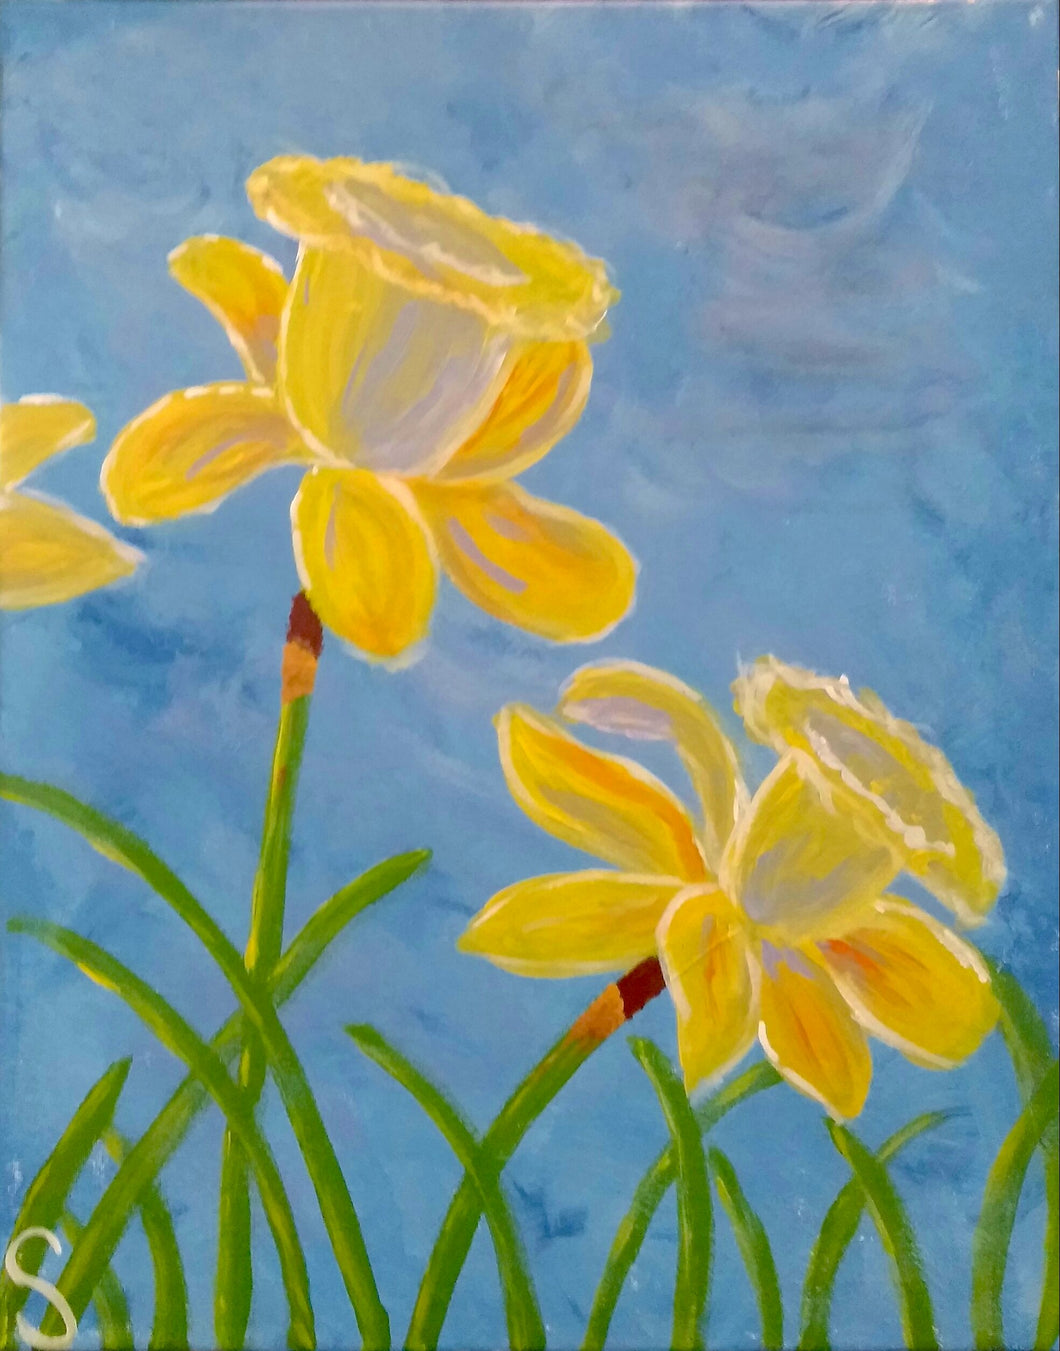 Daffodils Paint Kit (8x10 or 11x14)